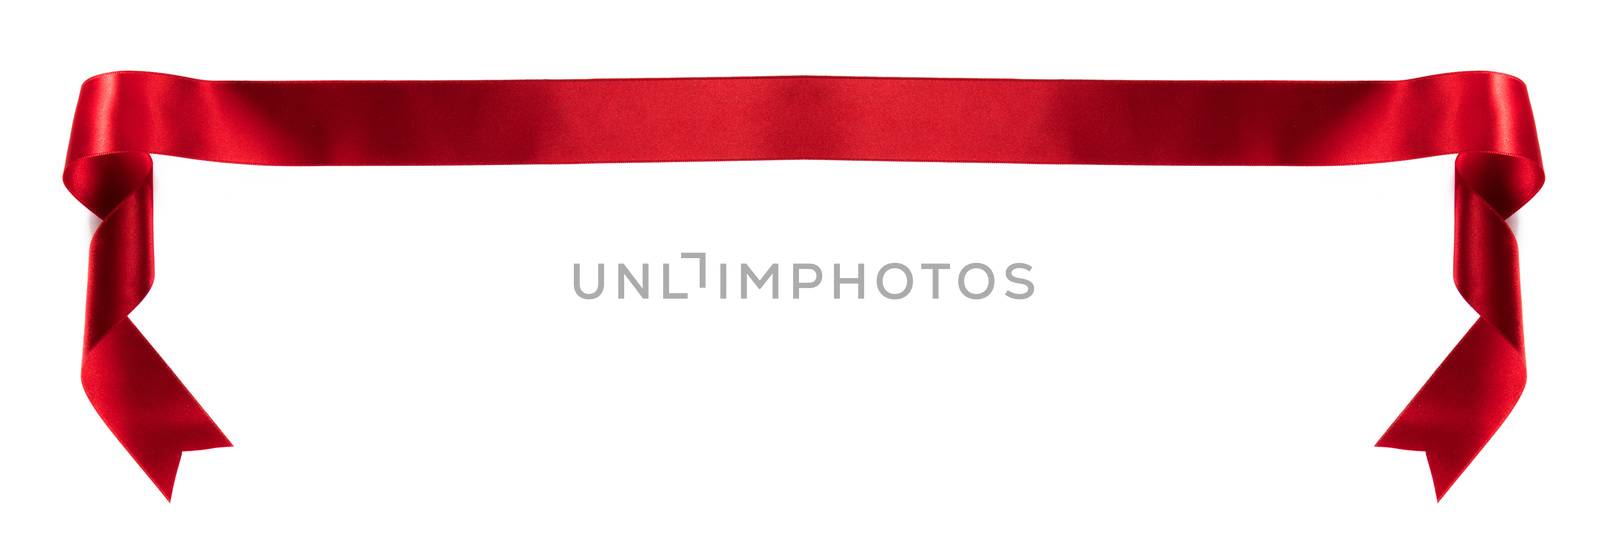 Red satin ribbon banner isolated on white background